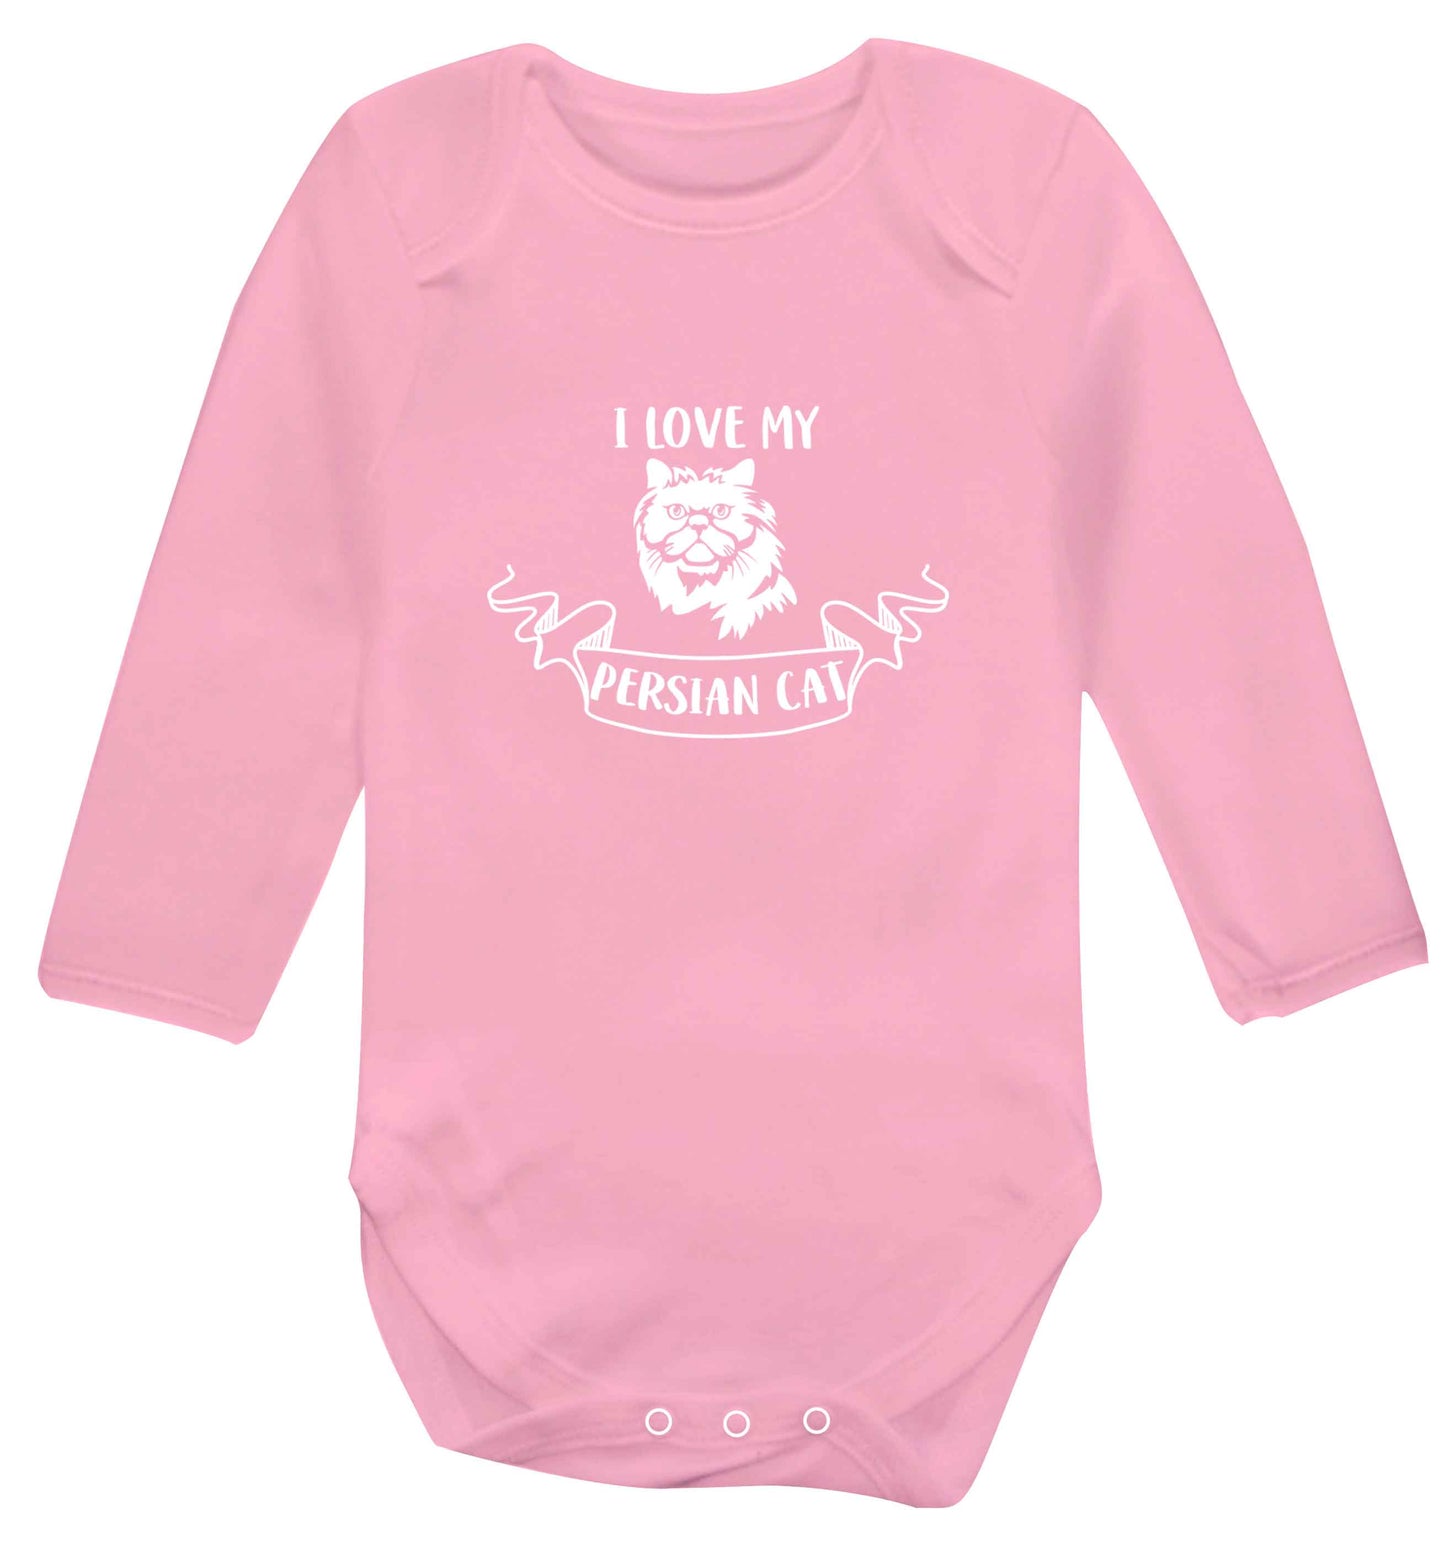 I love my persian cat baby vest long sleeved pale pink 6-12 months